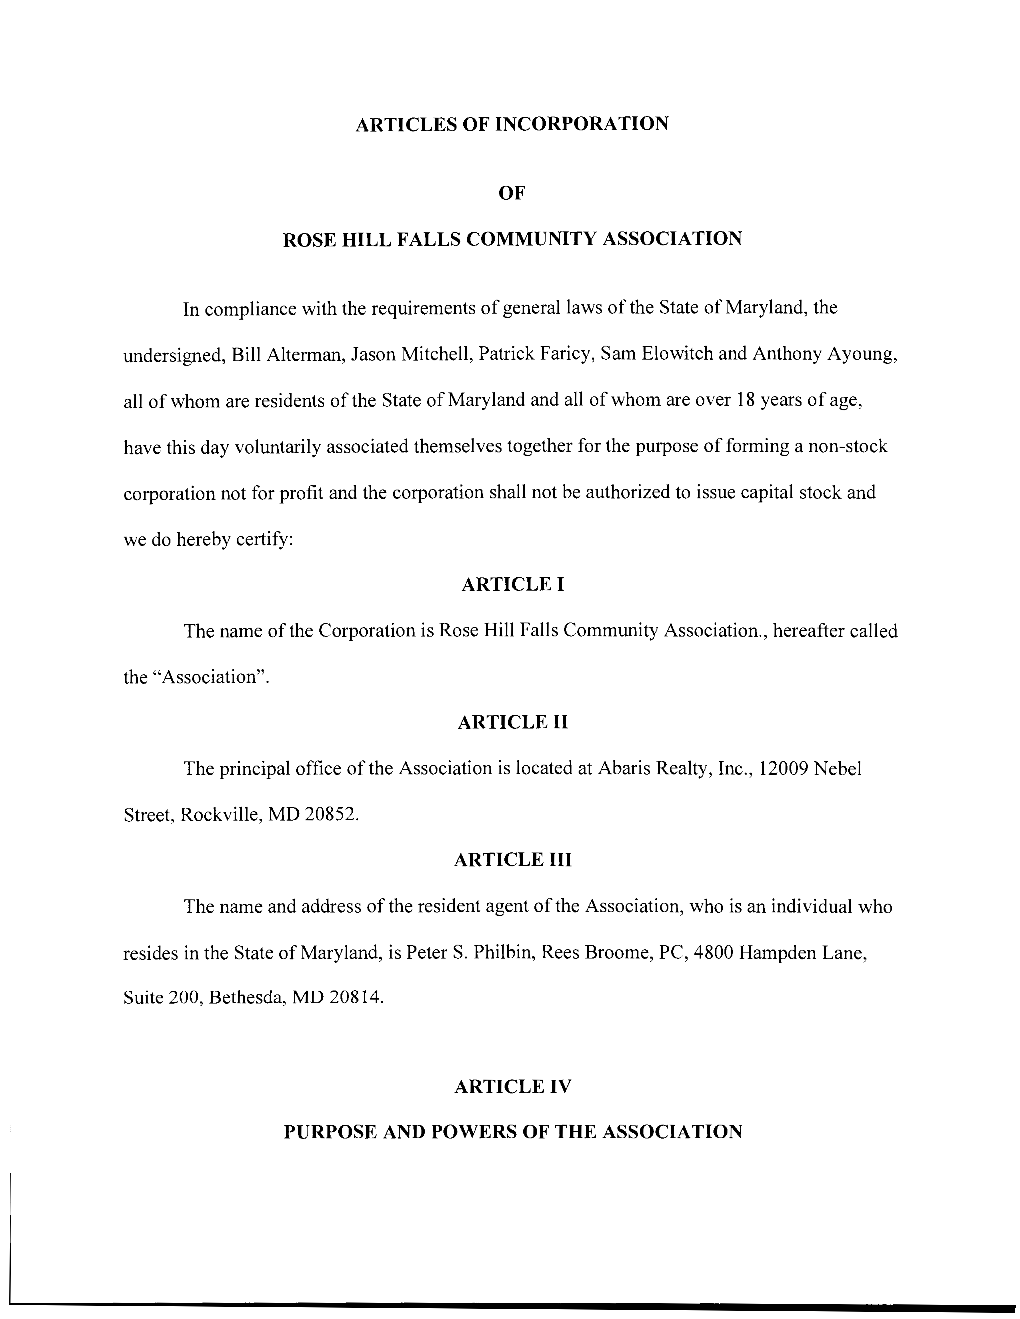 Articles of Incorporation of Rose Hill Falls Community